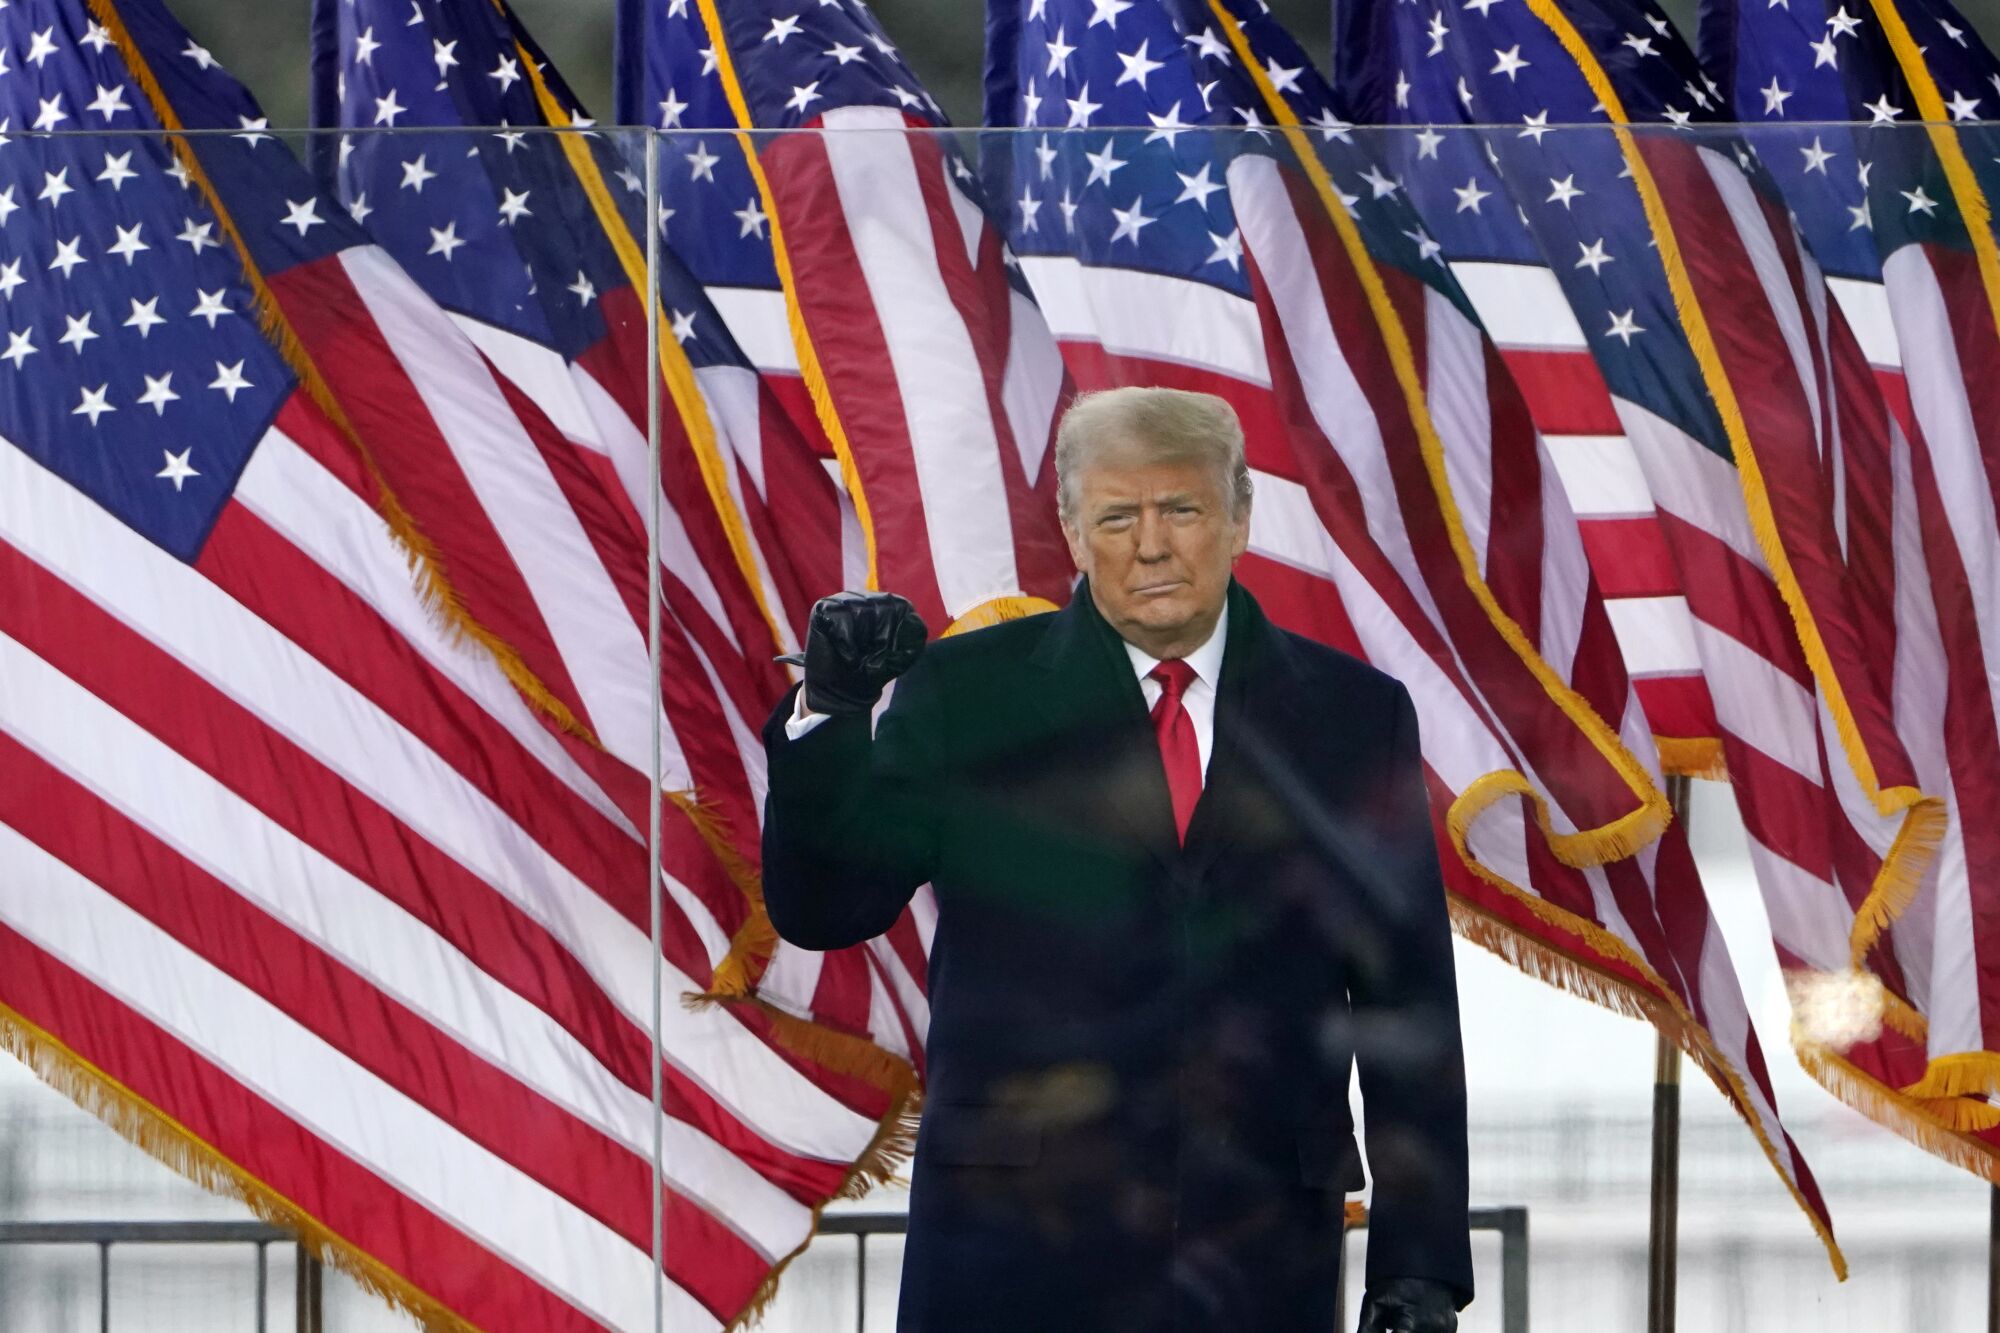 President Trump walks in front of a row of U.S. flags at a rally protesting the election.